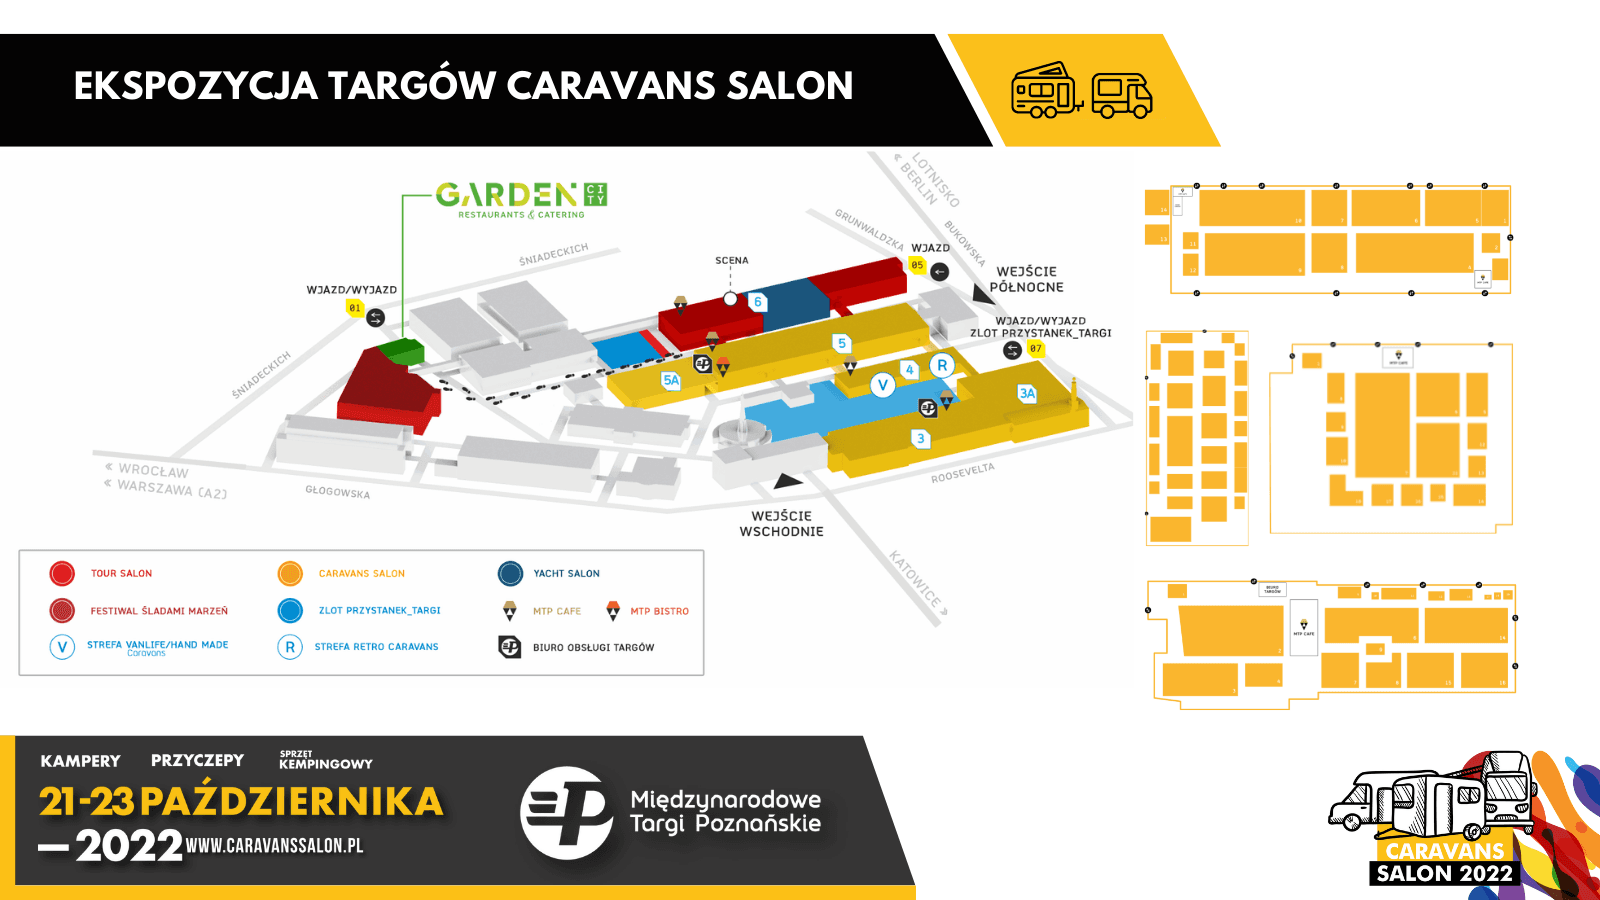 The wealth of caravanning, i.e. a guide to the Caravans Salon Poland fair in Poznań – main image